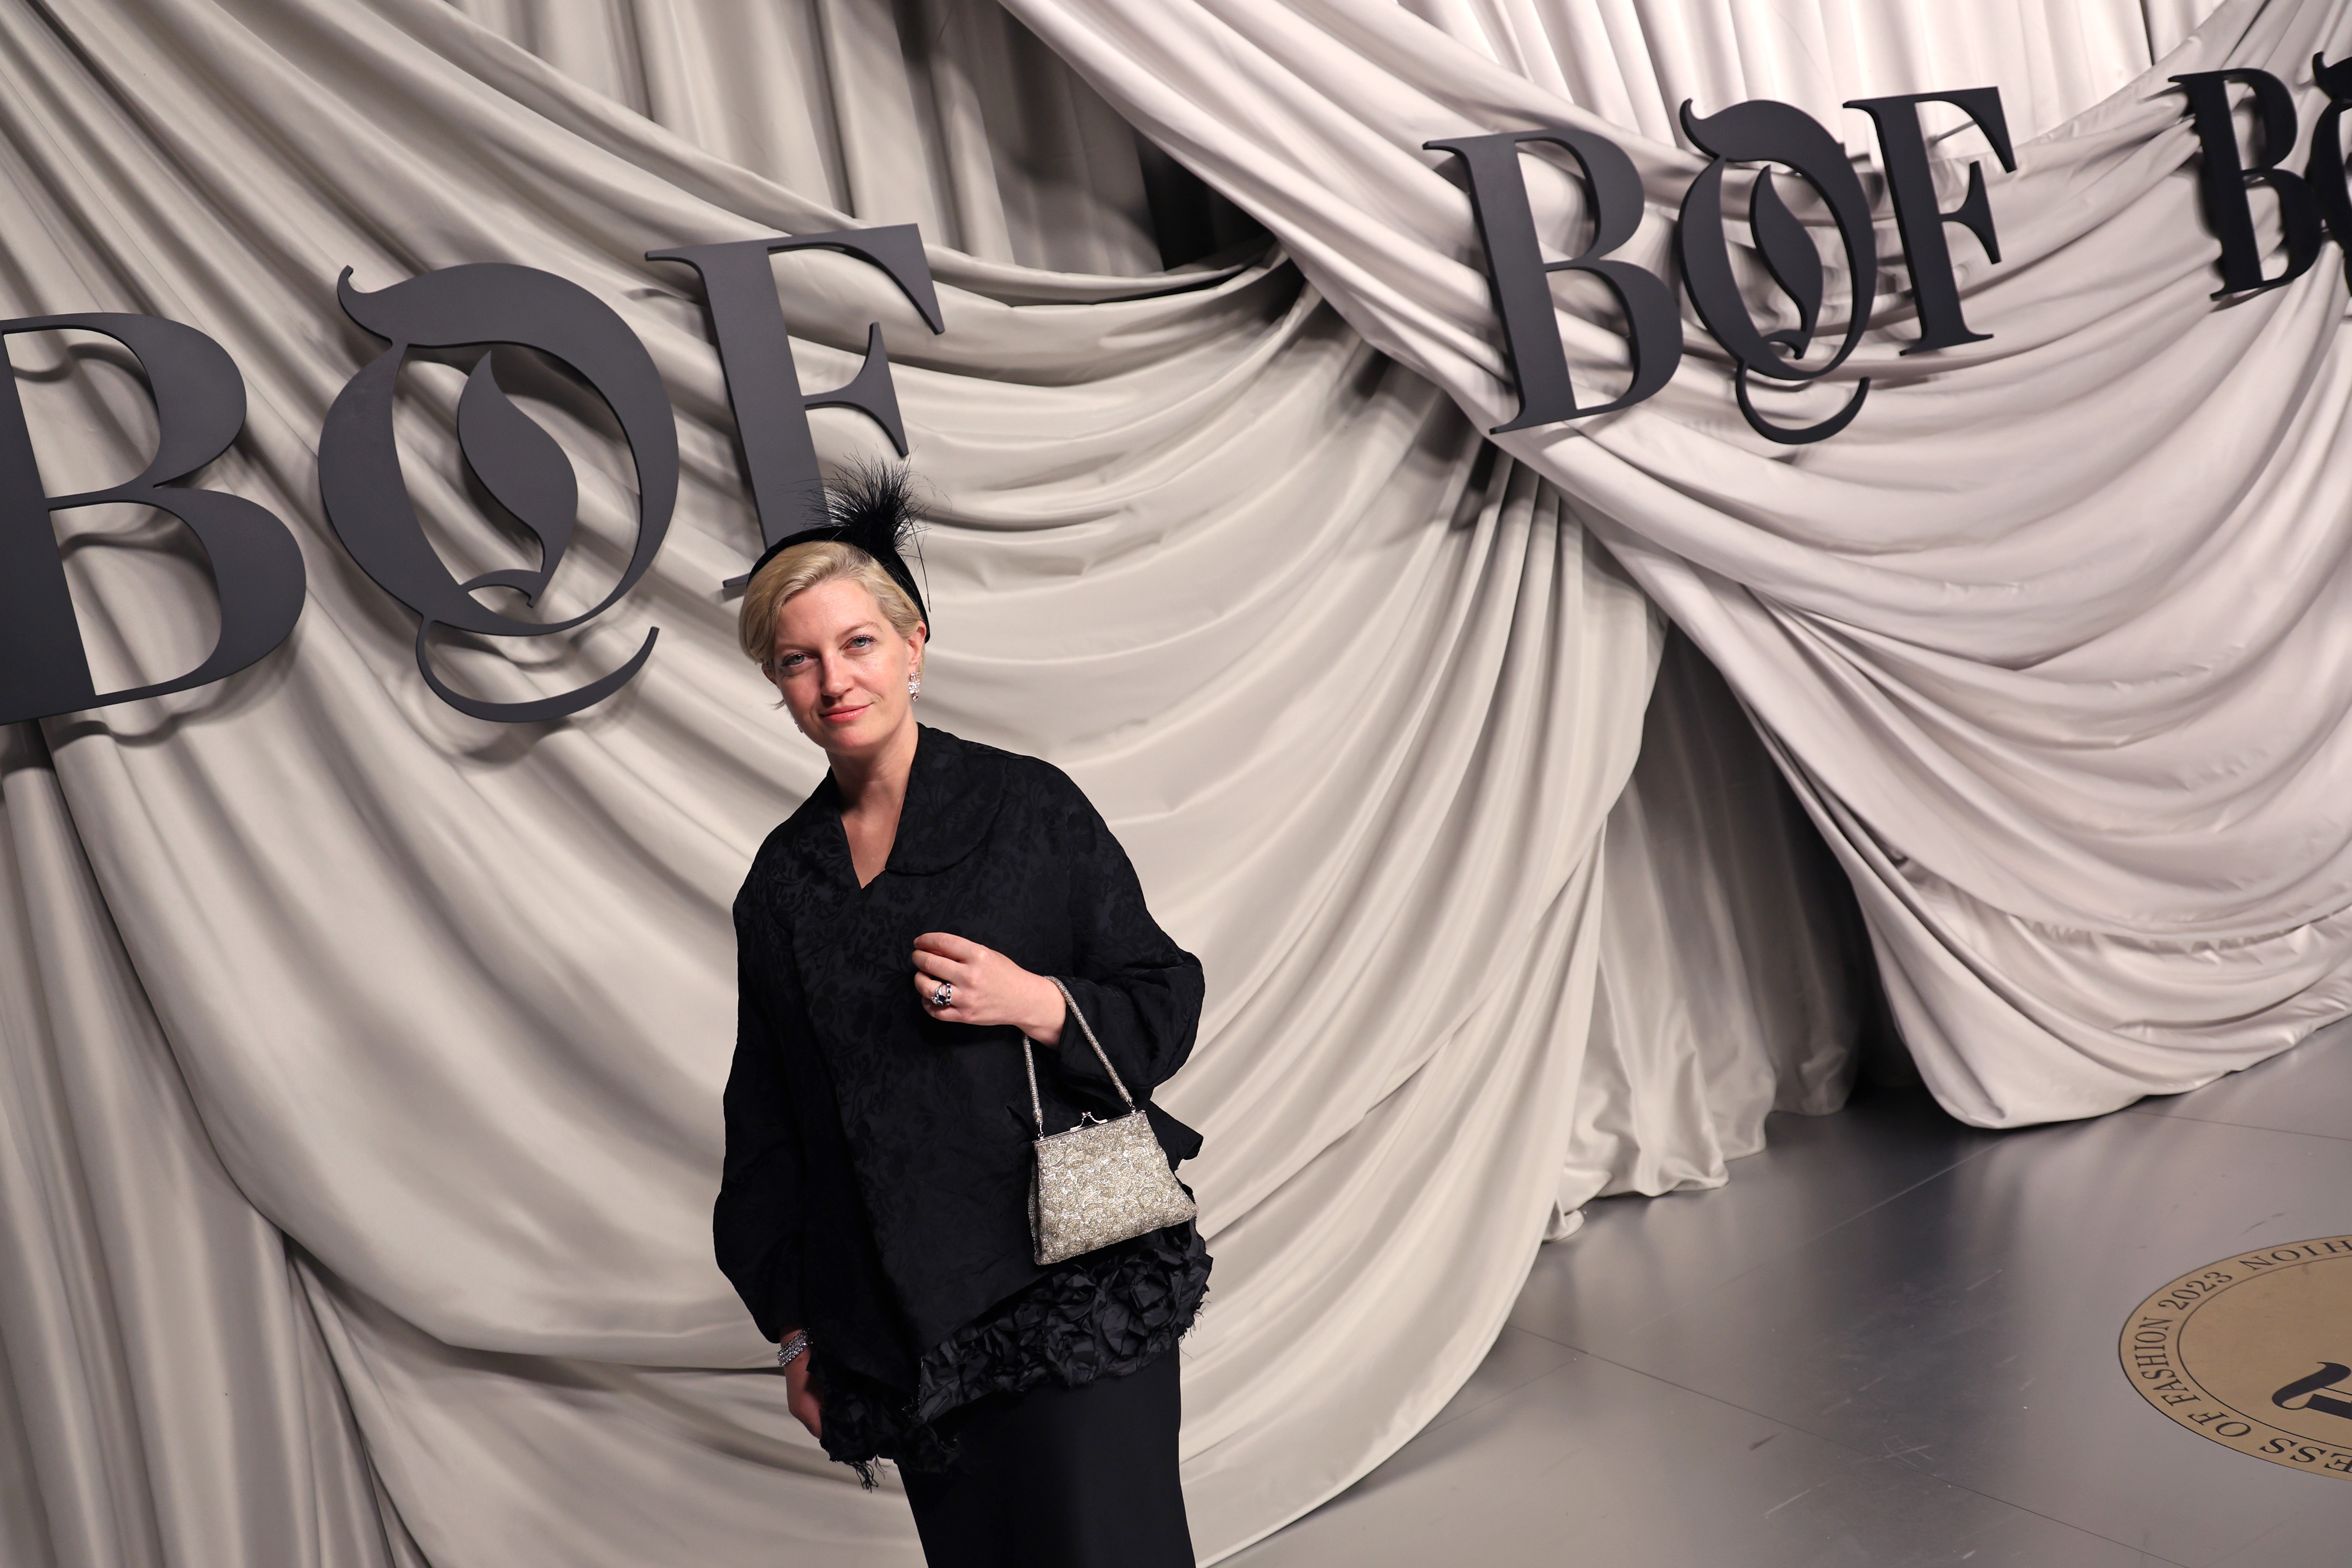 Woman posing in front of decorative draping and the Business of Fashion logo wearing a black feather headband and black outfit